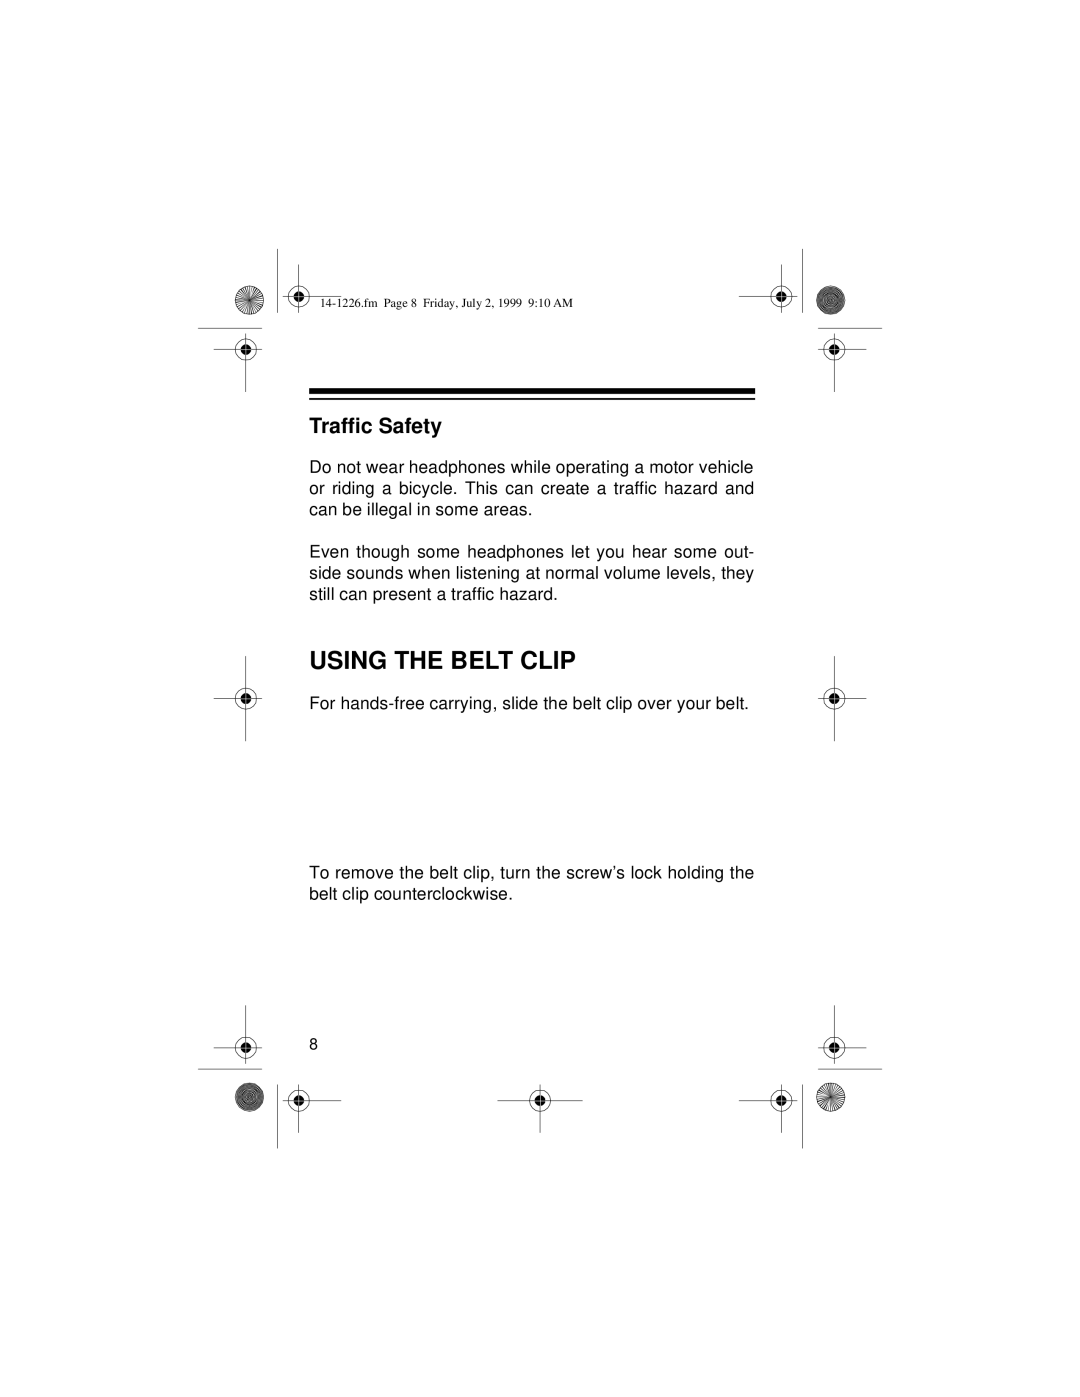 Optimus SCP-85 owner manual Using The Belt Clip, Traffic Safety 